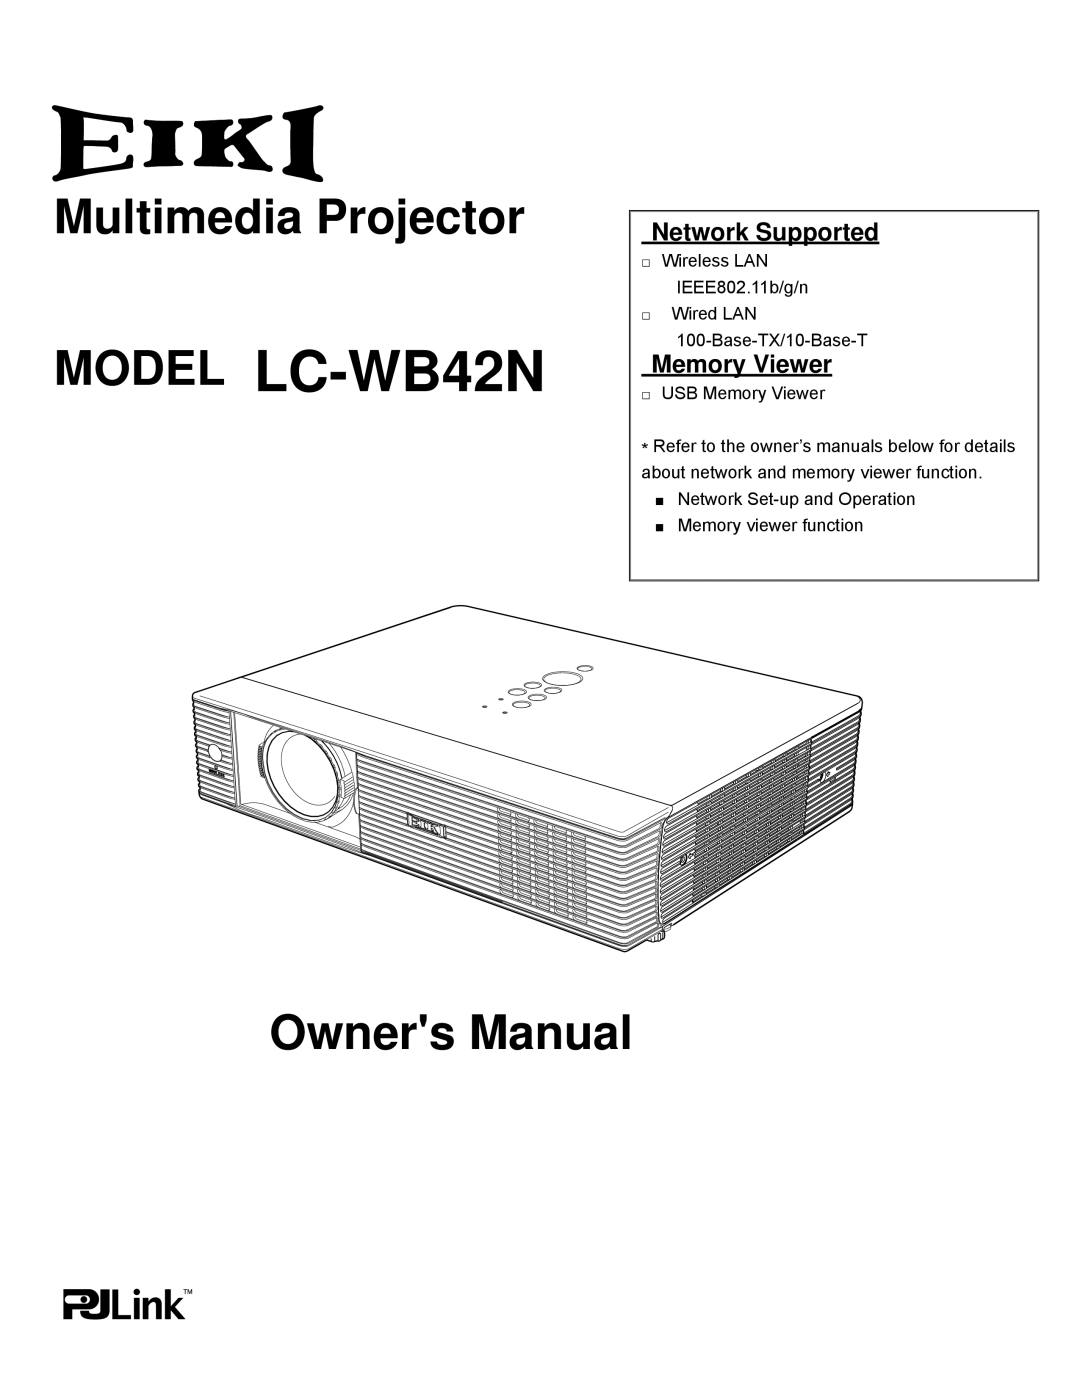 Eiki owner manual Network Supported, Memory Viewer, MODEL LC-WB42N, Multimedia Projector, Owners Manual 